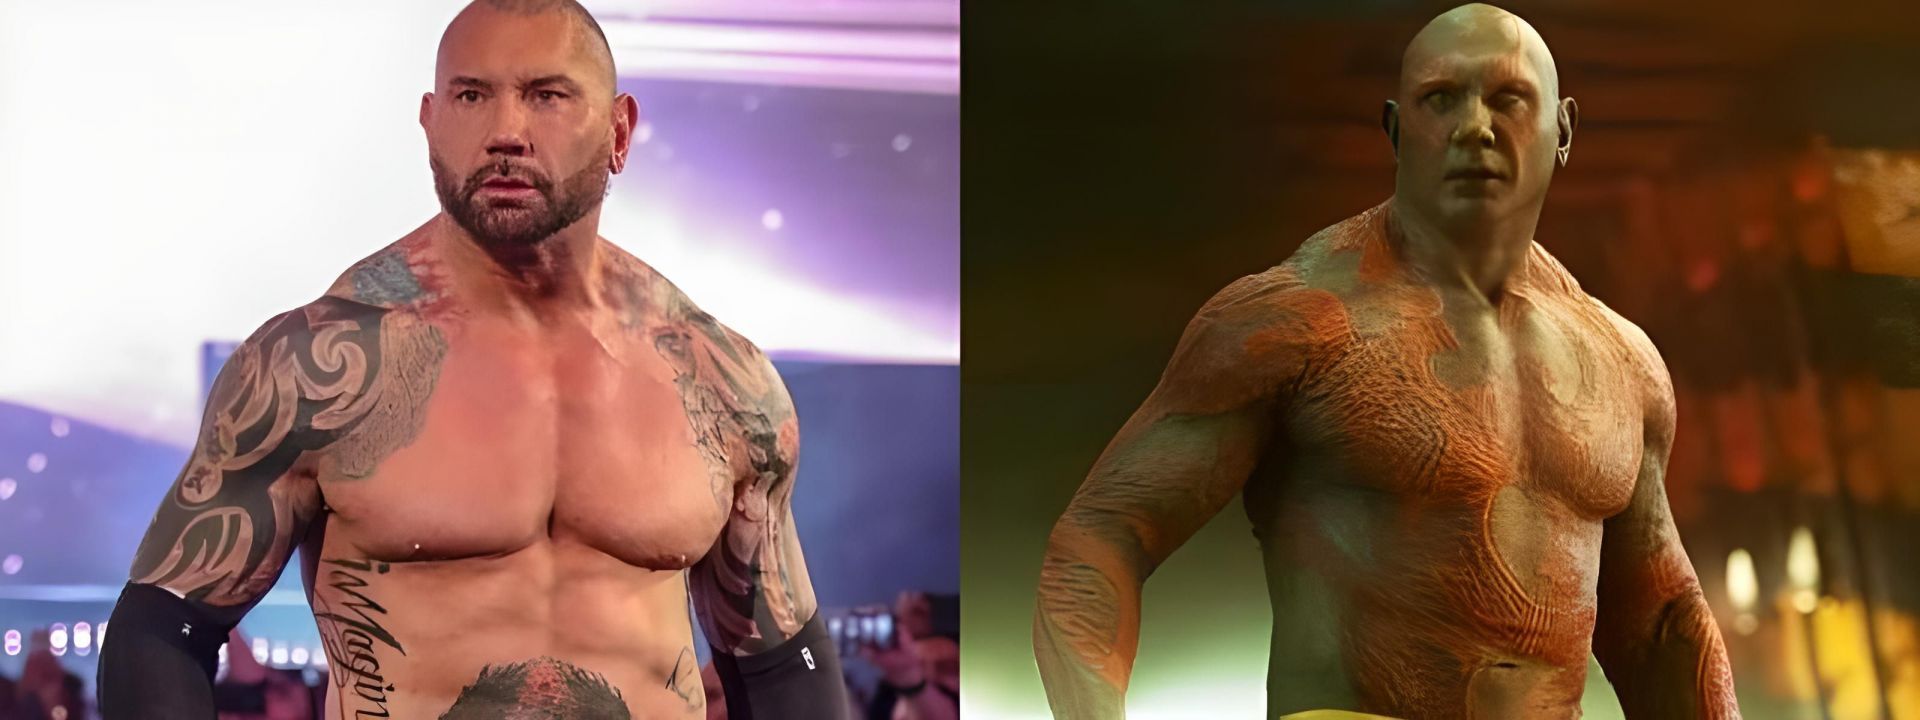 Batista as &quot;Drax the Destroyer&quot; in Guardians of the Galaxy Vol. II